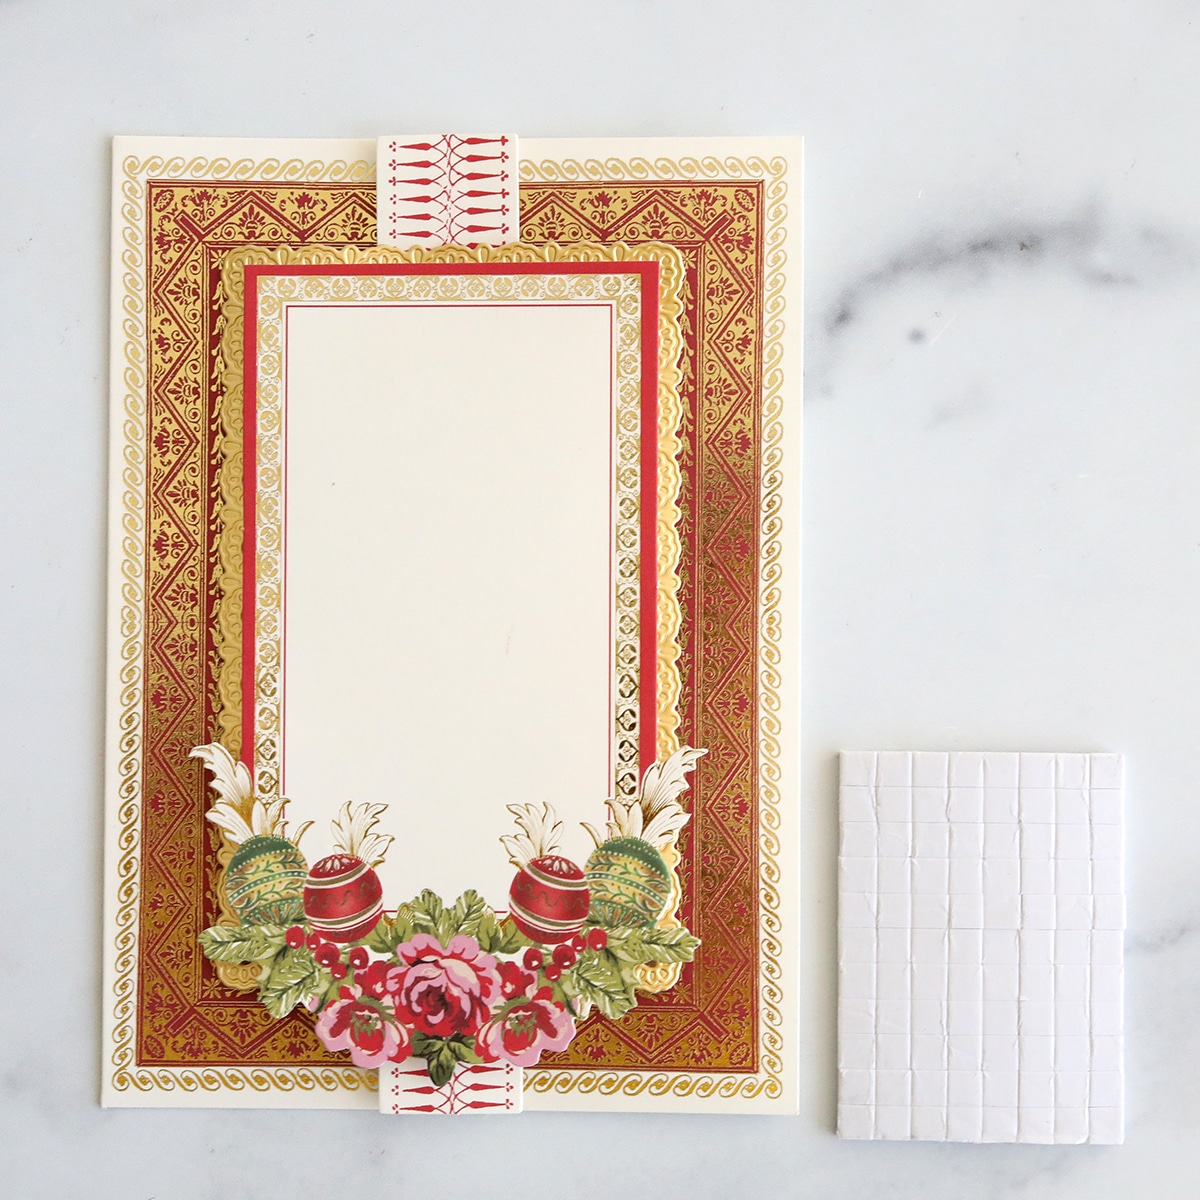 A christmas card with a red and gold frame.